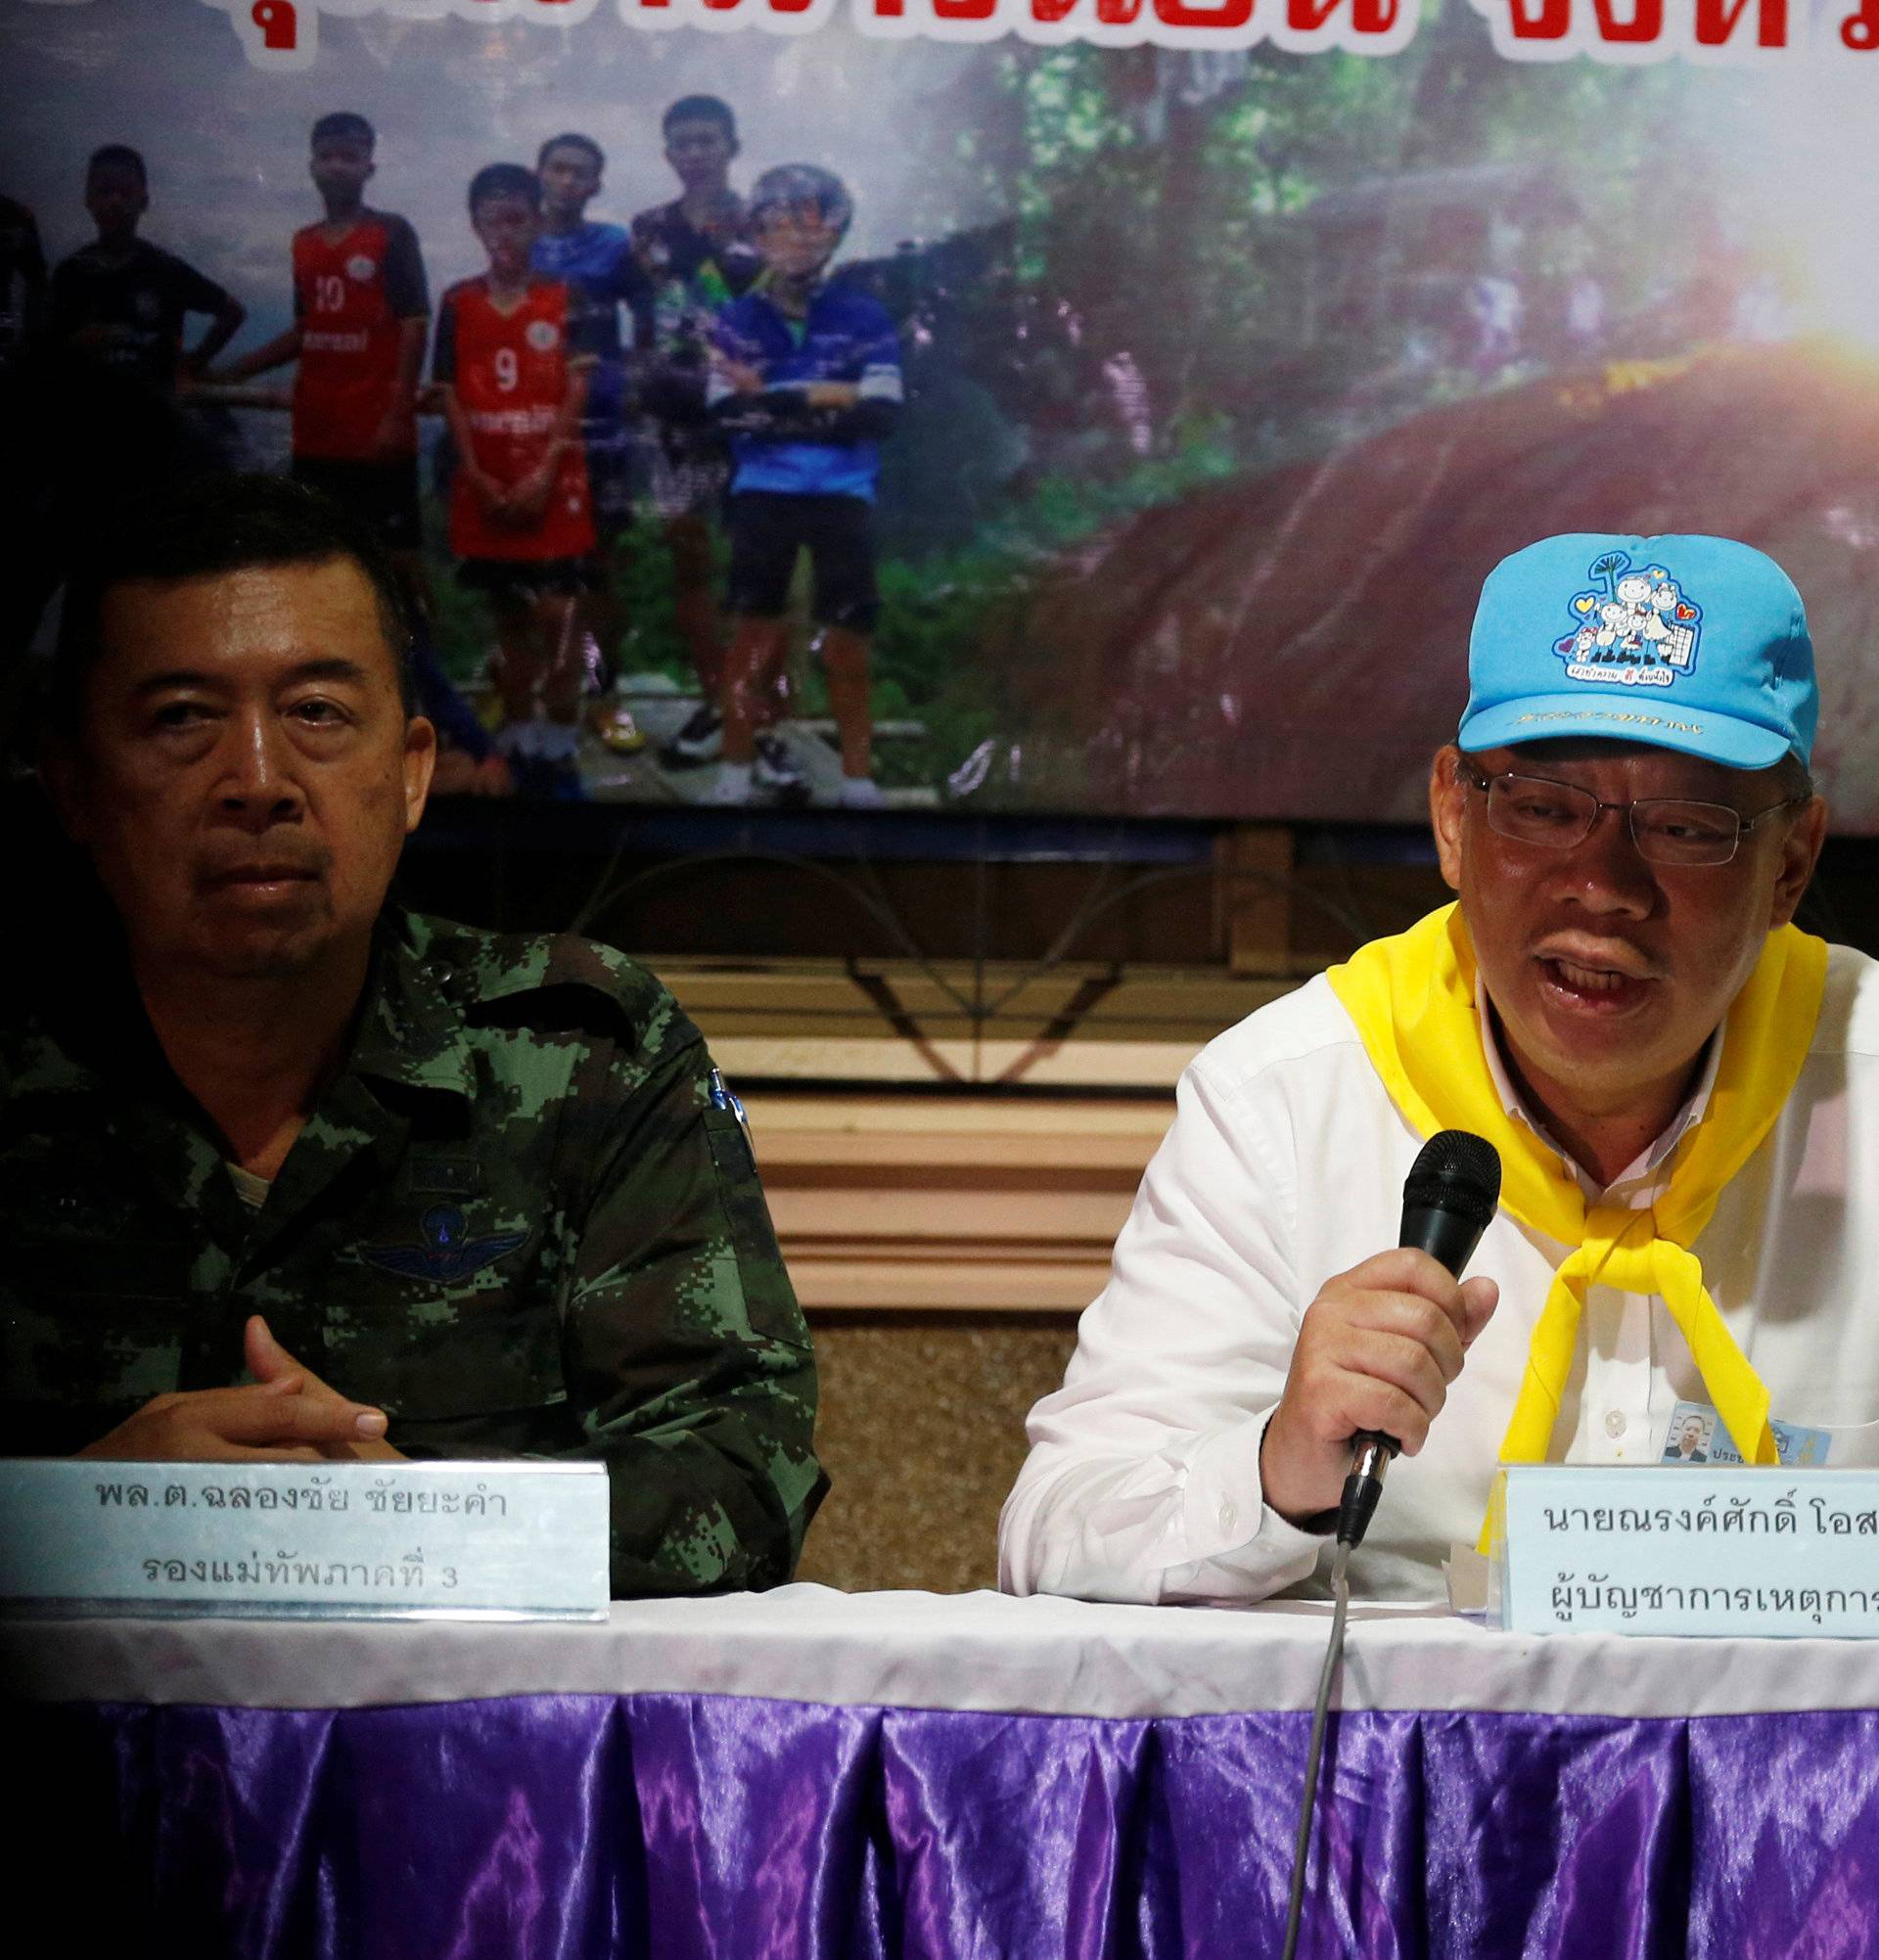 Chiang Rai province acting governor Narongsak Osatanakorn talks to journalist during a news conference near Tham Luang cave complex, in the northern province of Chiang Rai